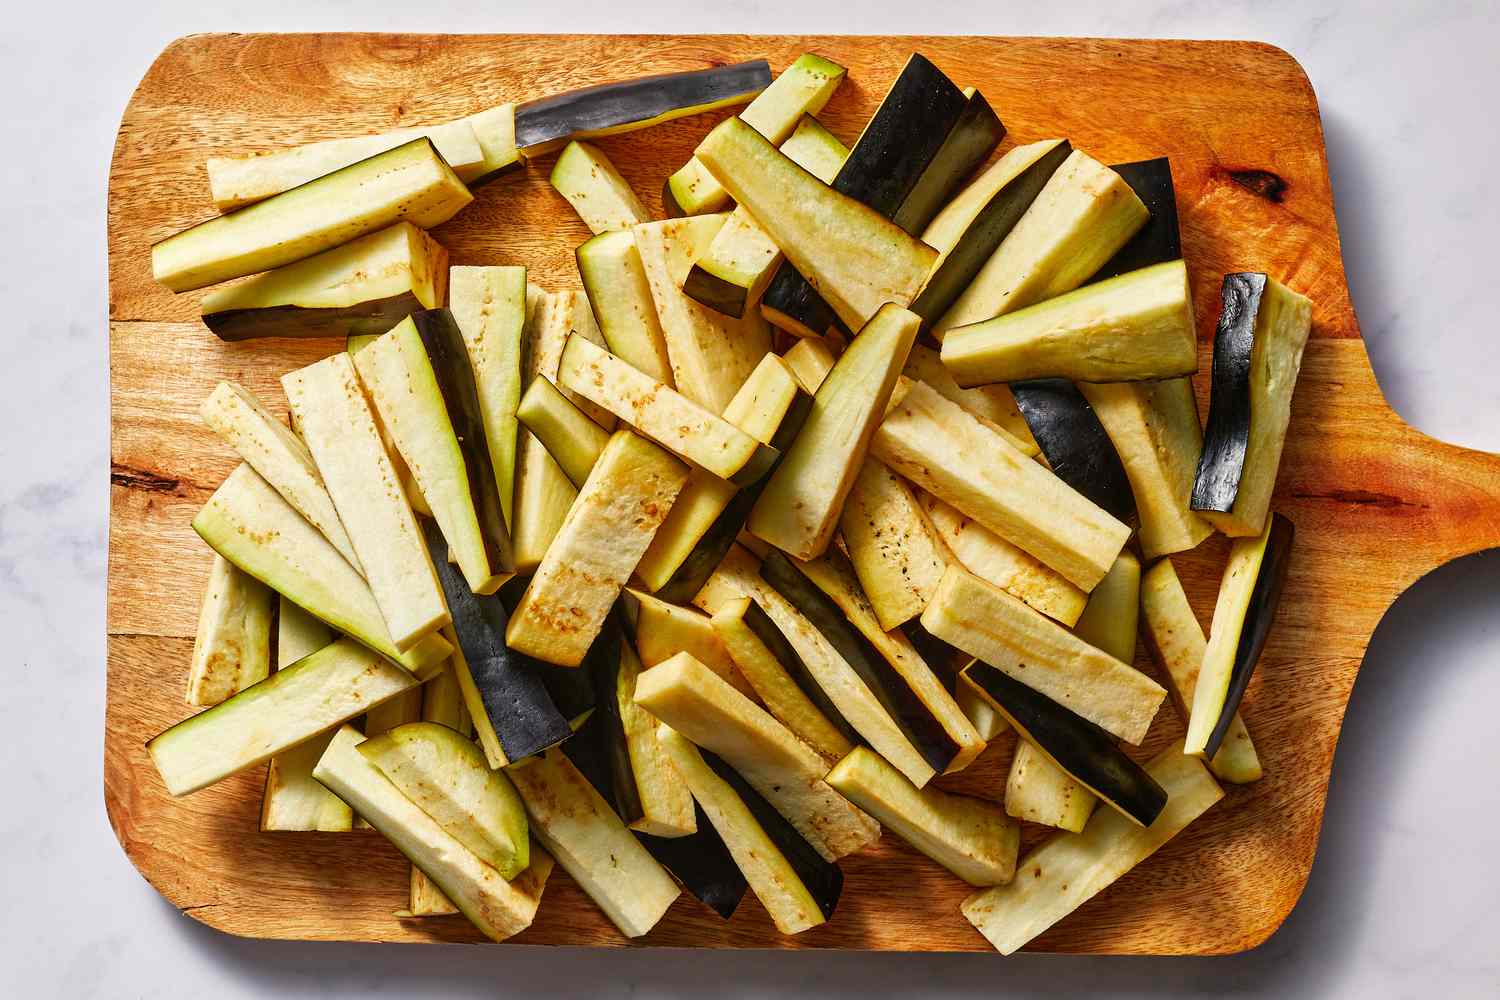 Eggplants cut into even strips on a wooden cutting board 